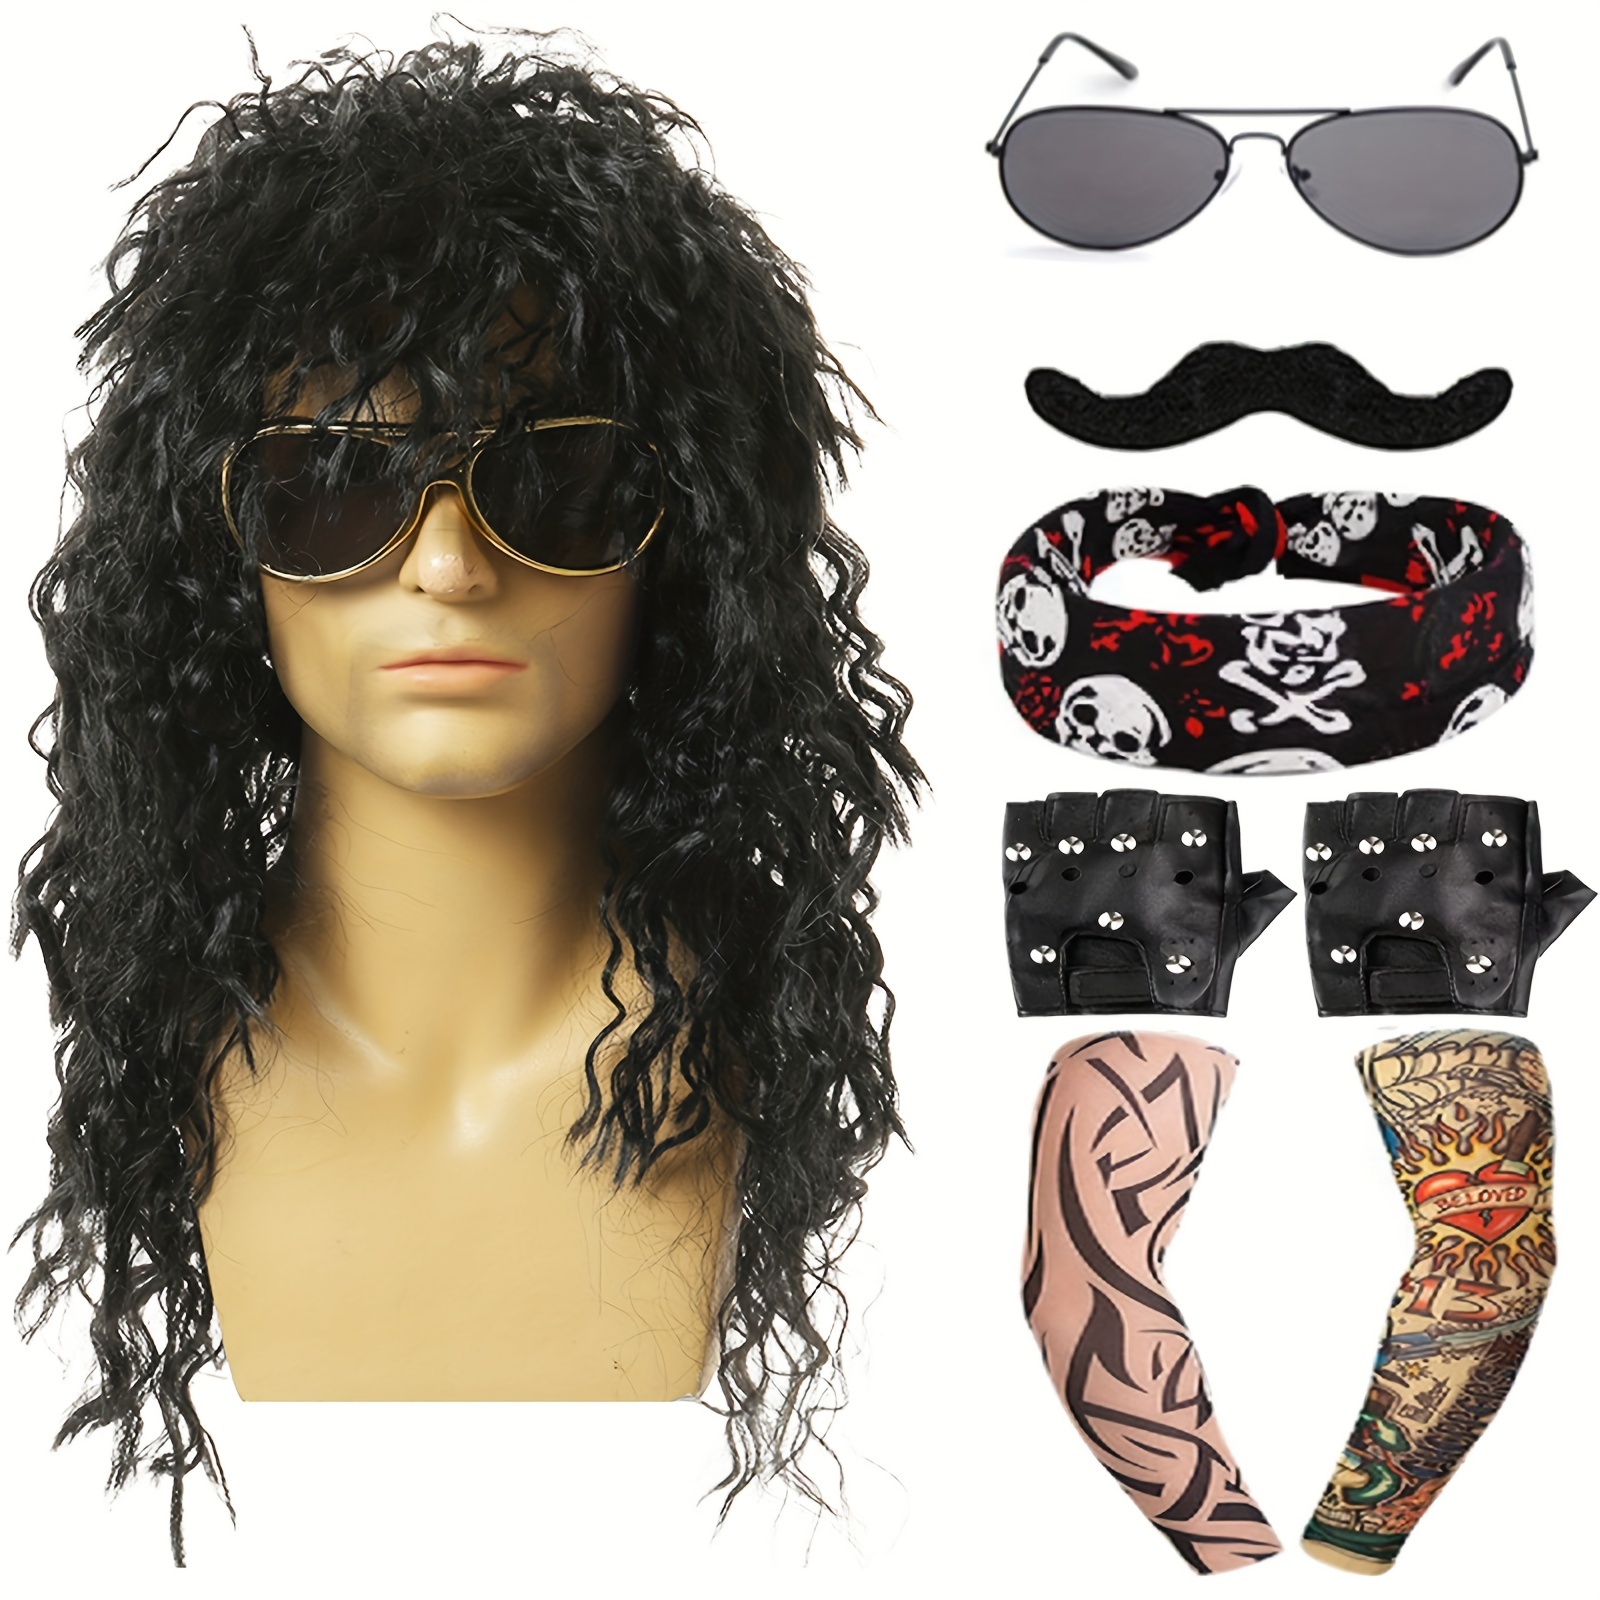 

8pcs 70s & 80s Rocker Costume Set - Heavy Metal Hippie Wig, Fashion Glasses, Punk Gloves, Tattoo Sleeves For Men & Women - Perfect For & Retro Parties Costumes For Women Clothes For Women